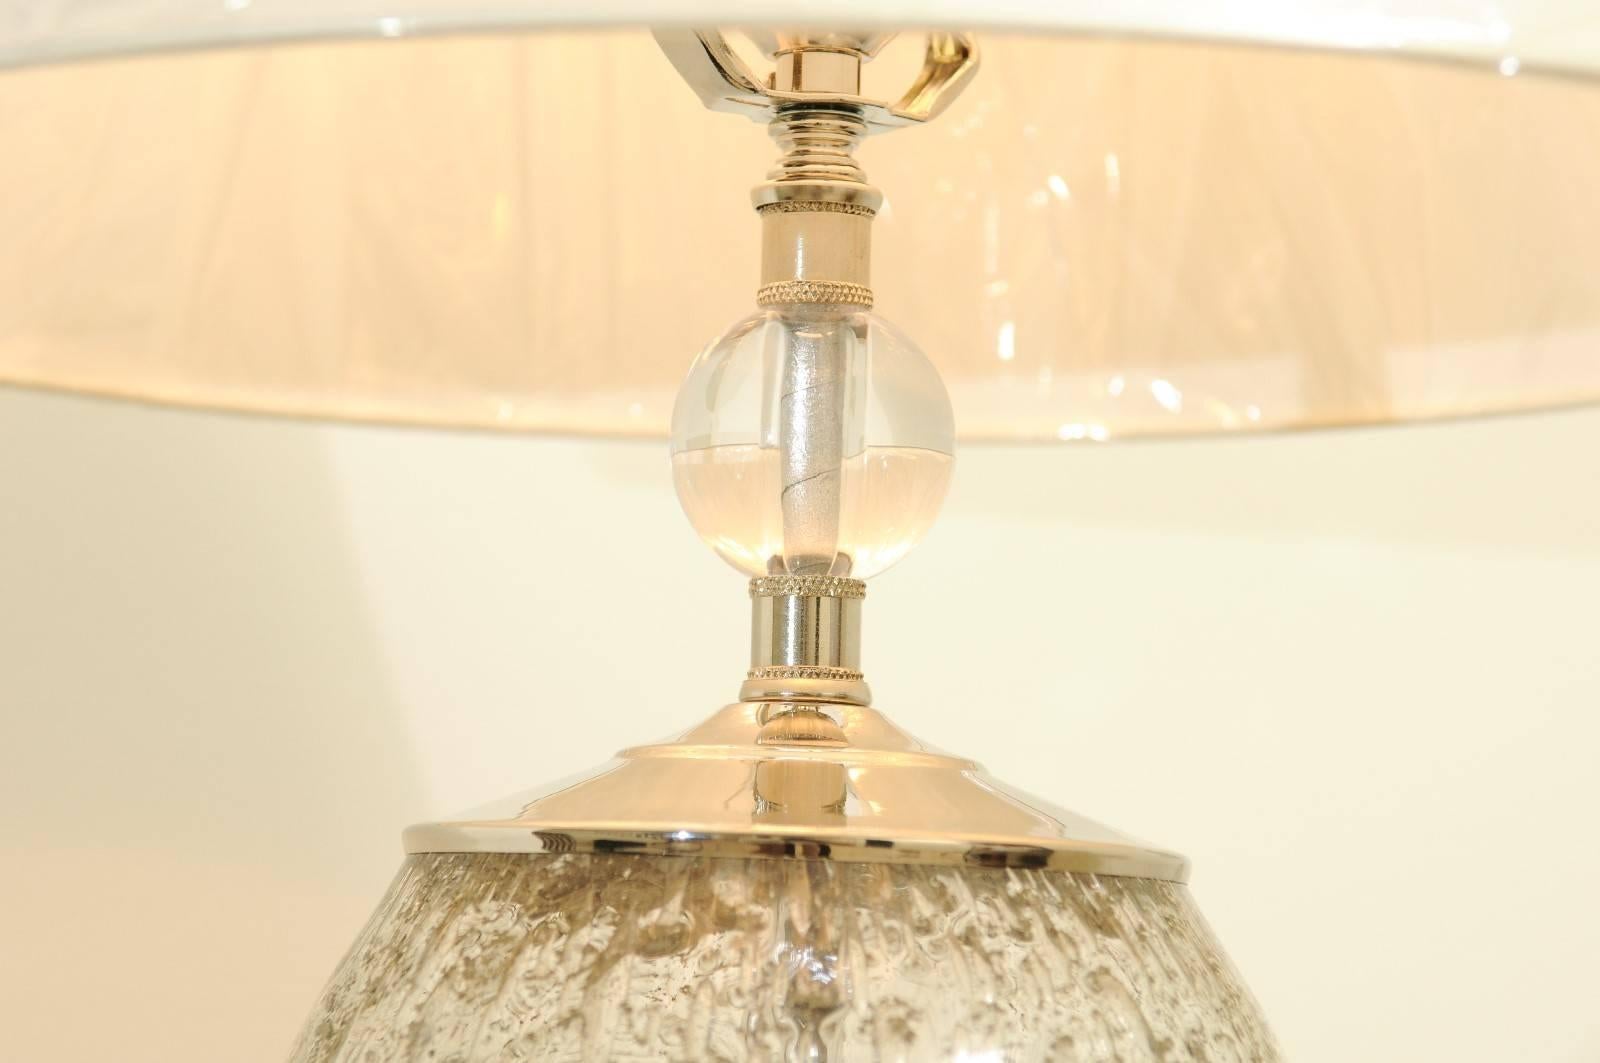 Gorgeous Pair of Italian Blown Glass Lamps with Lucite and Brass Accents For Sale 2